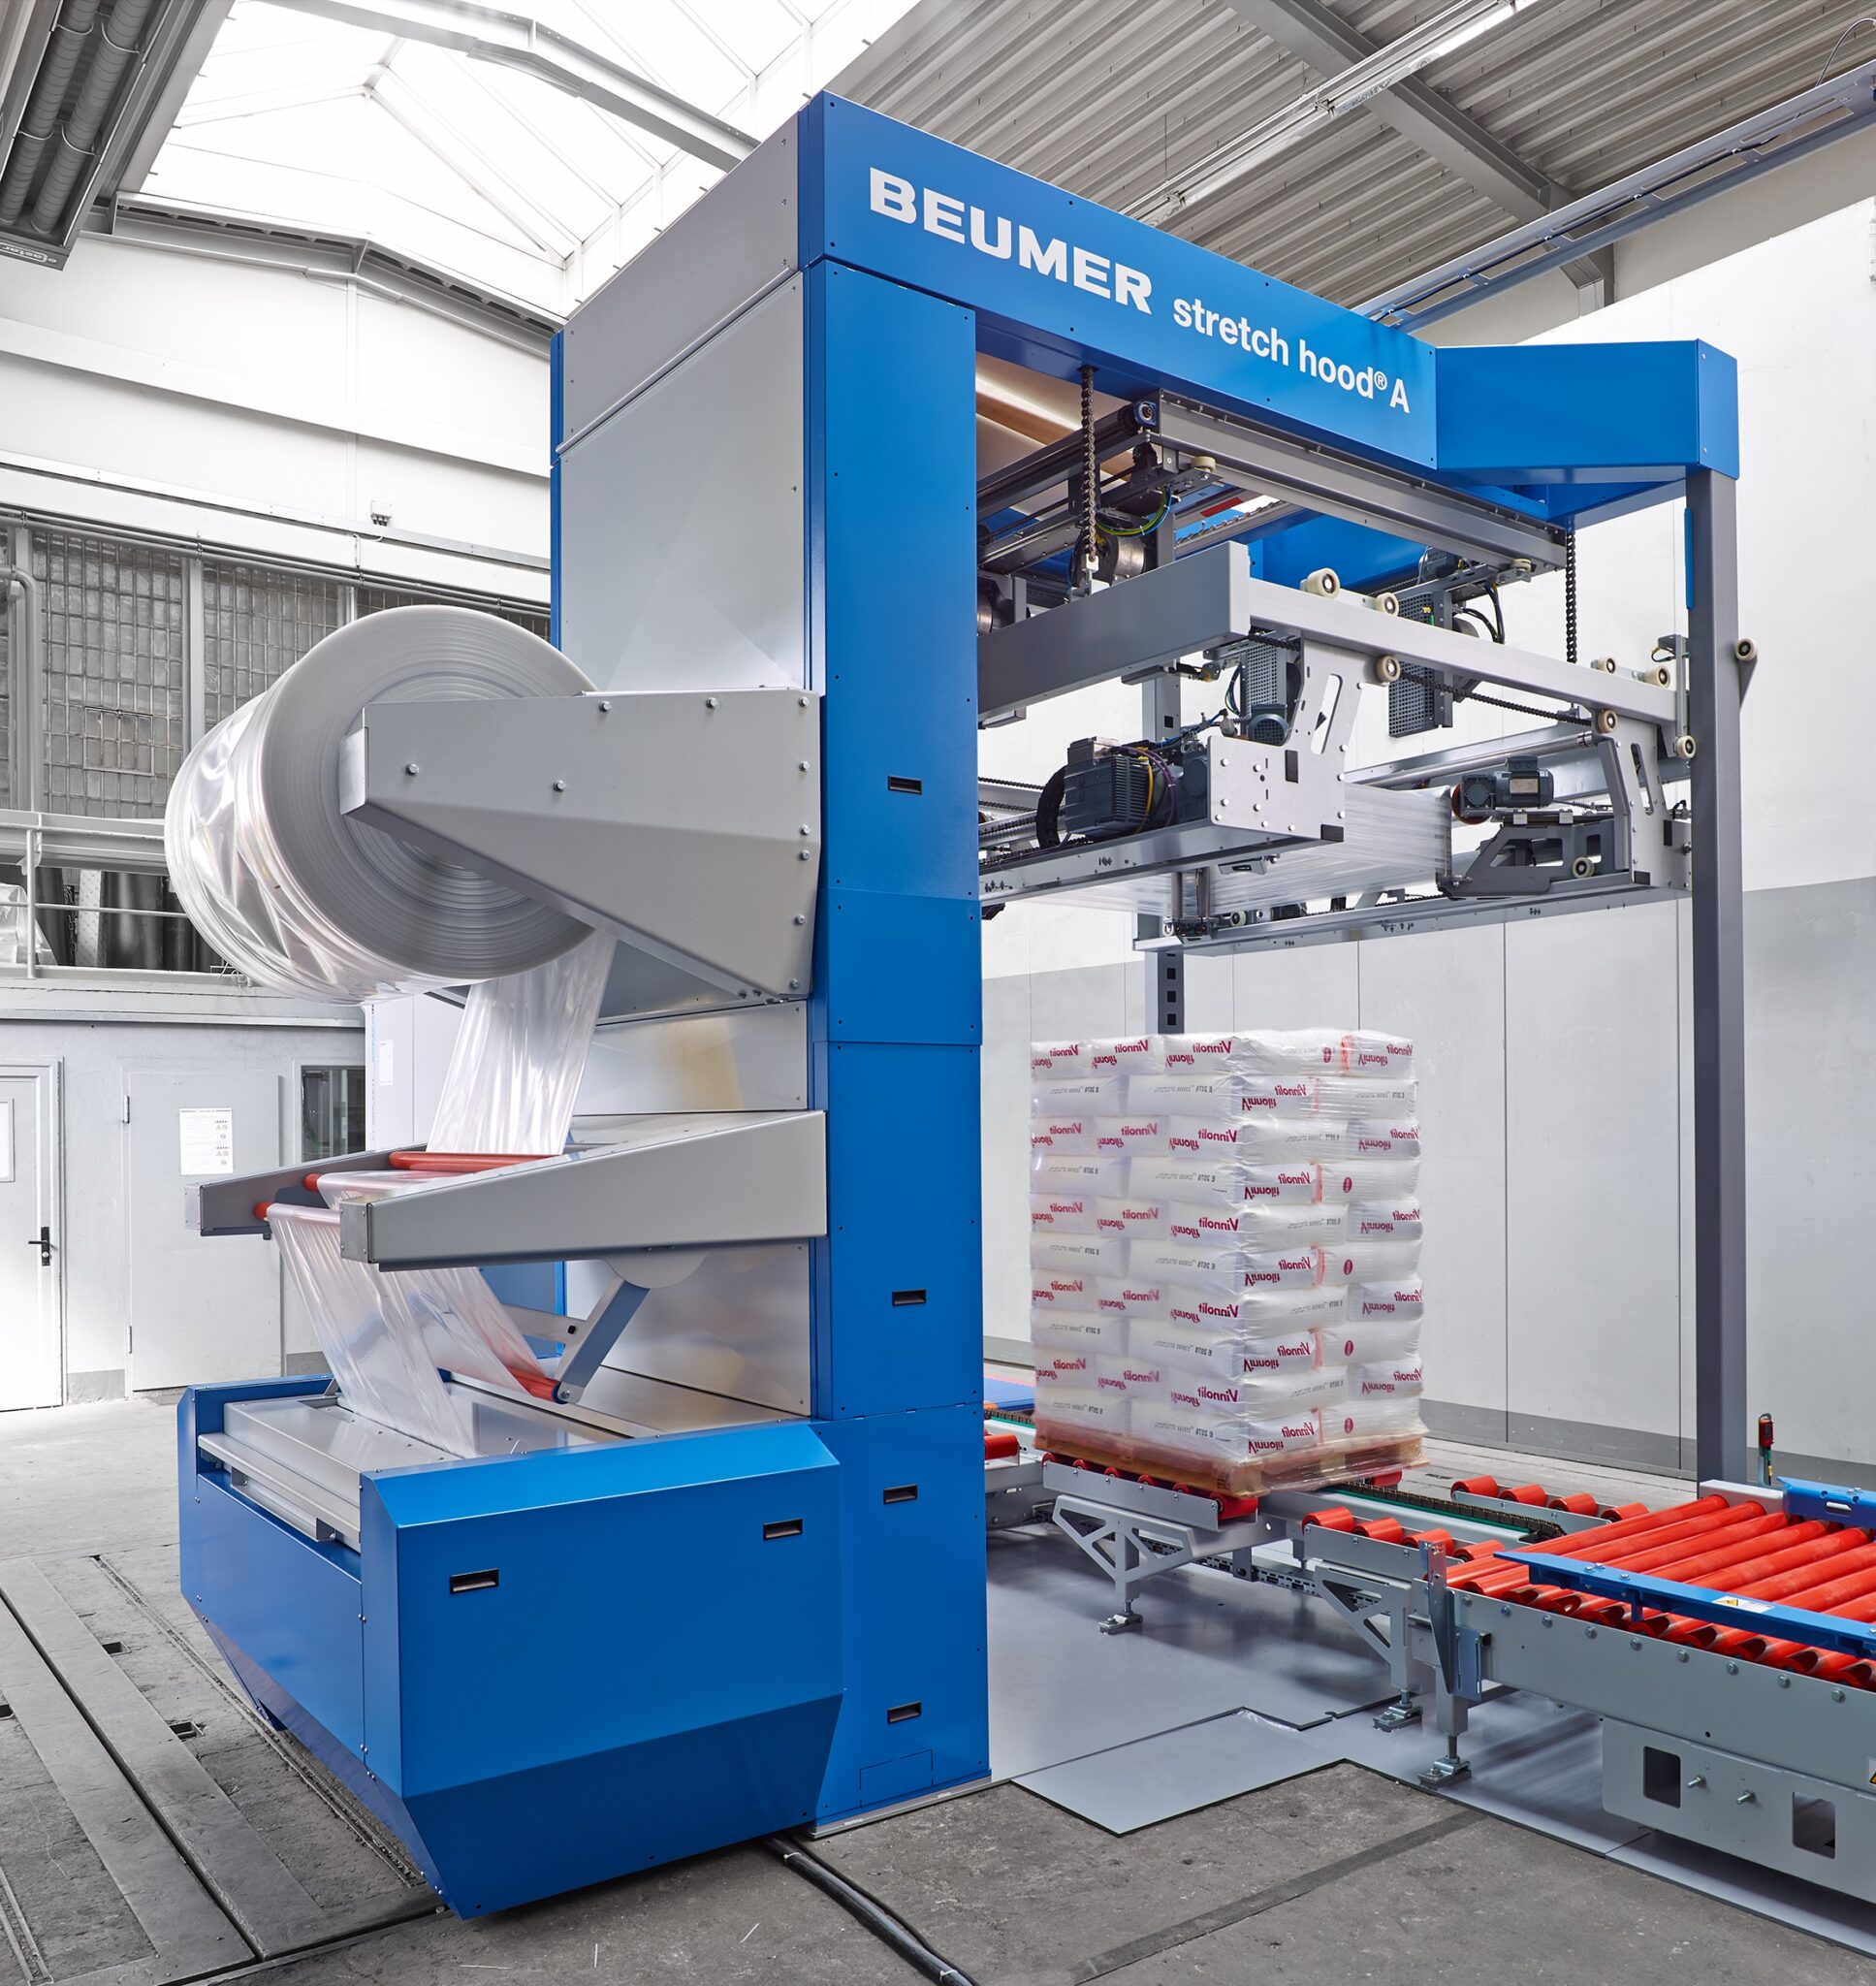 Beumer supplies individual packaging solutions